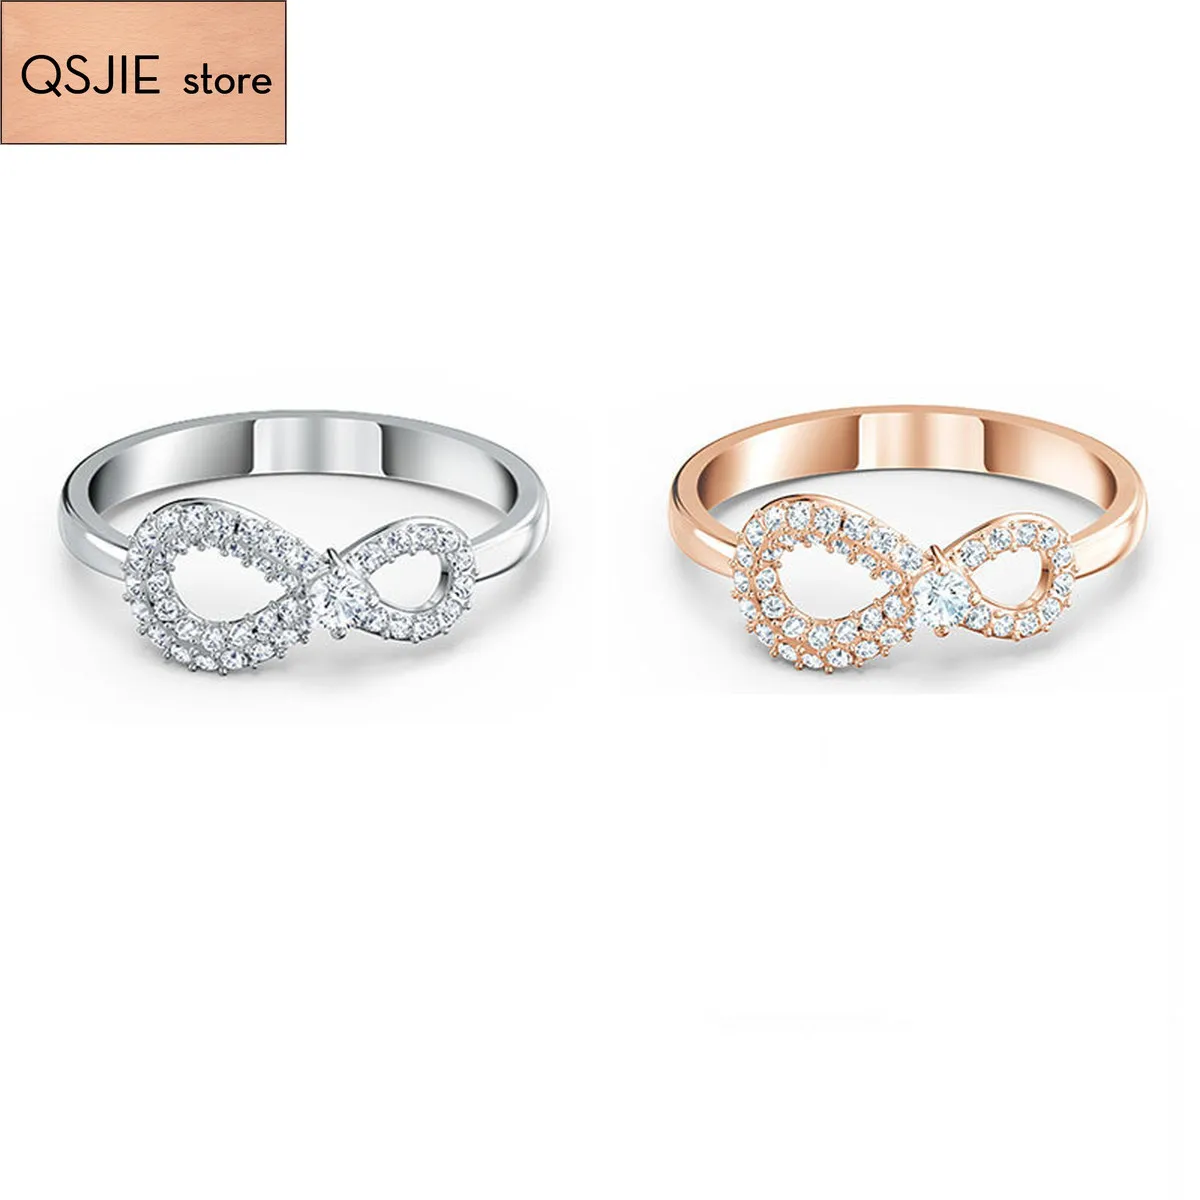 

QSJIE High quality SWA new forever love romance number 8 lucky female best gift ring Charming fashion jewelry